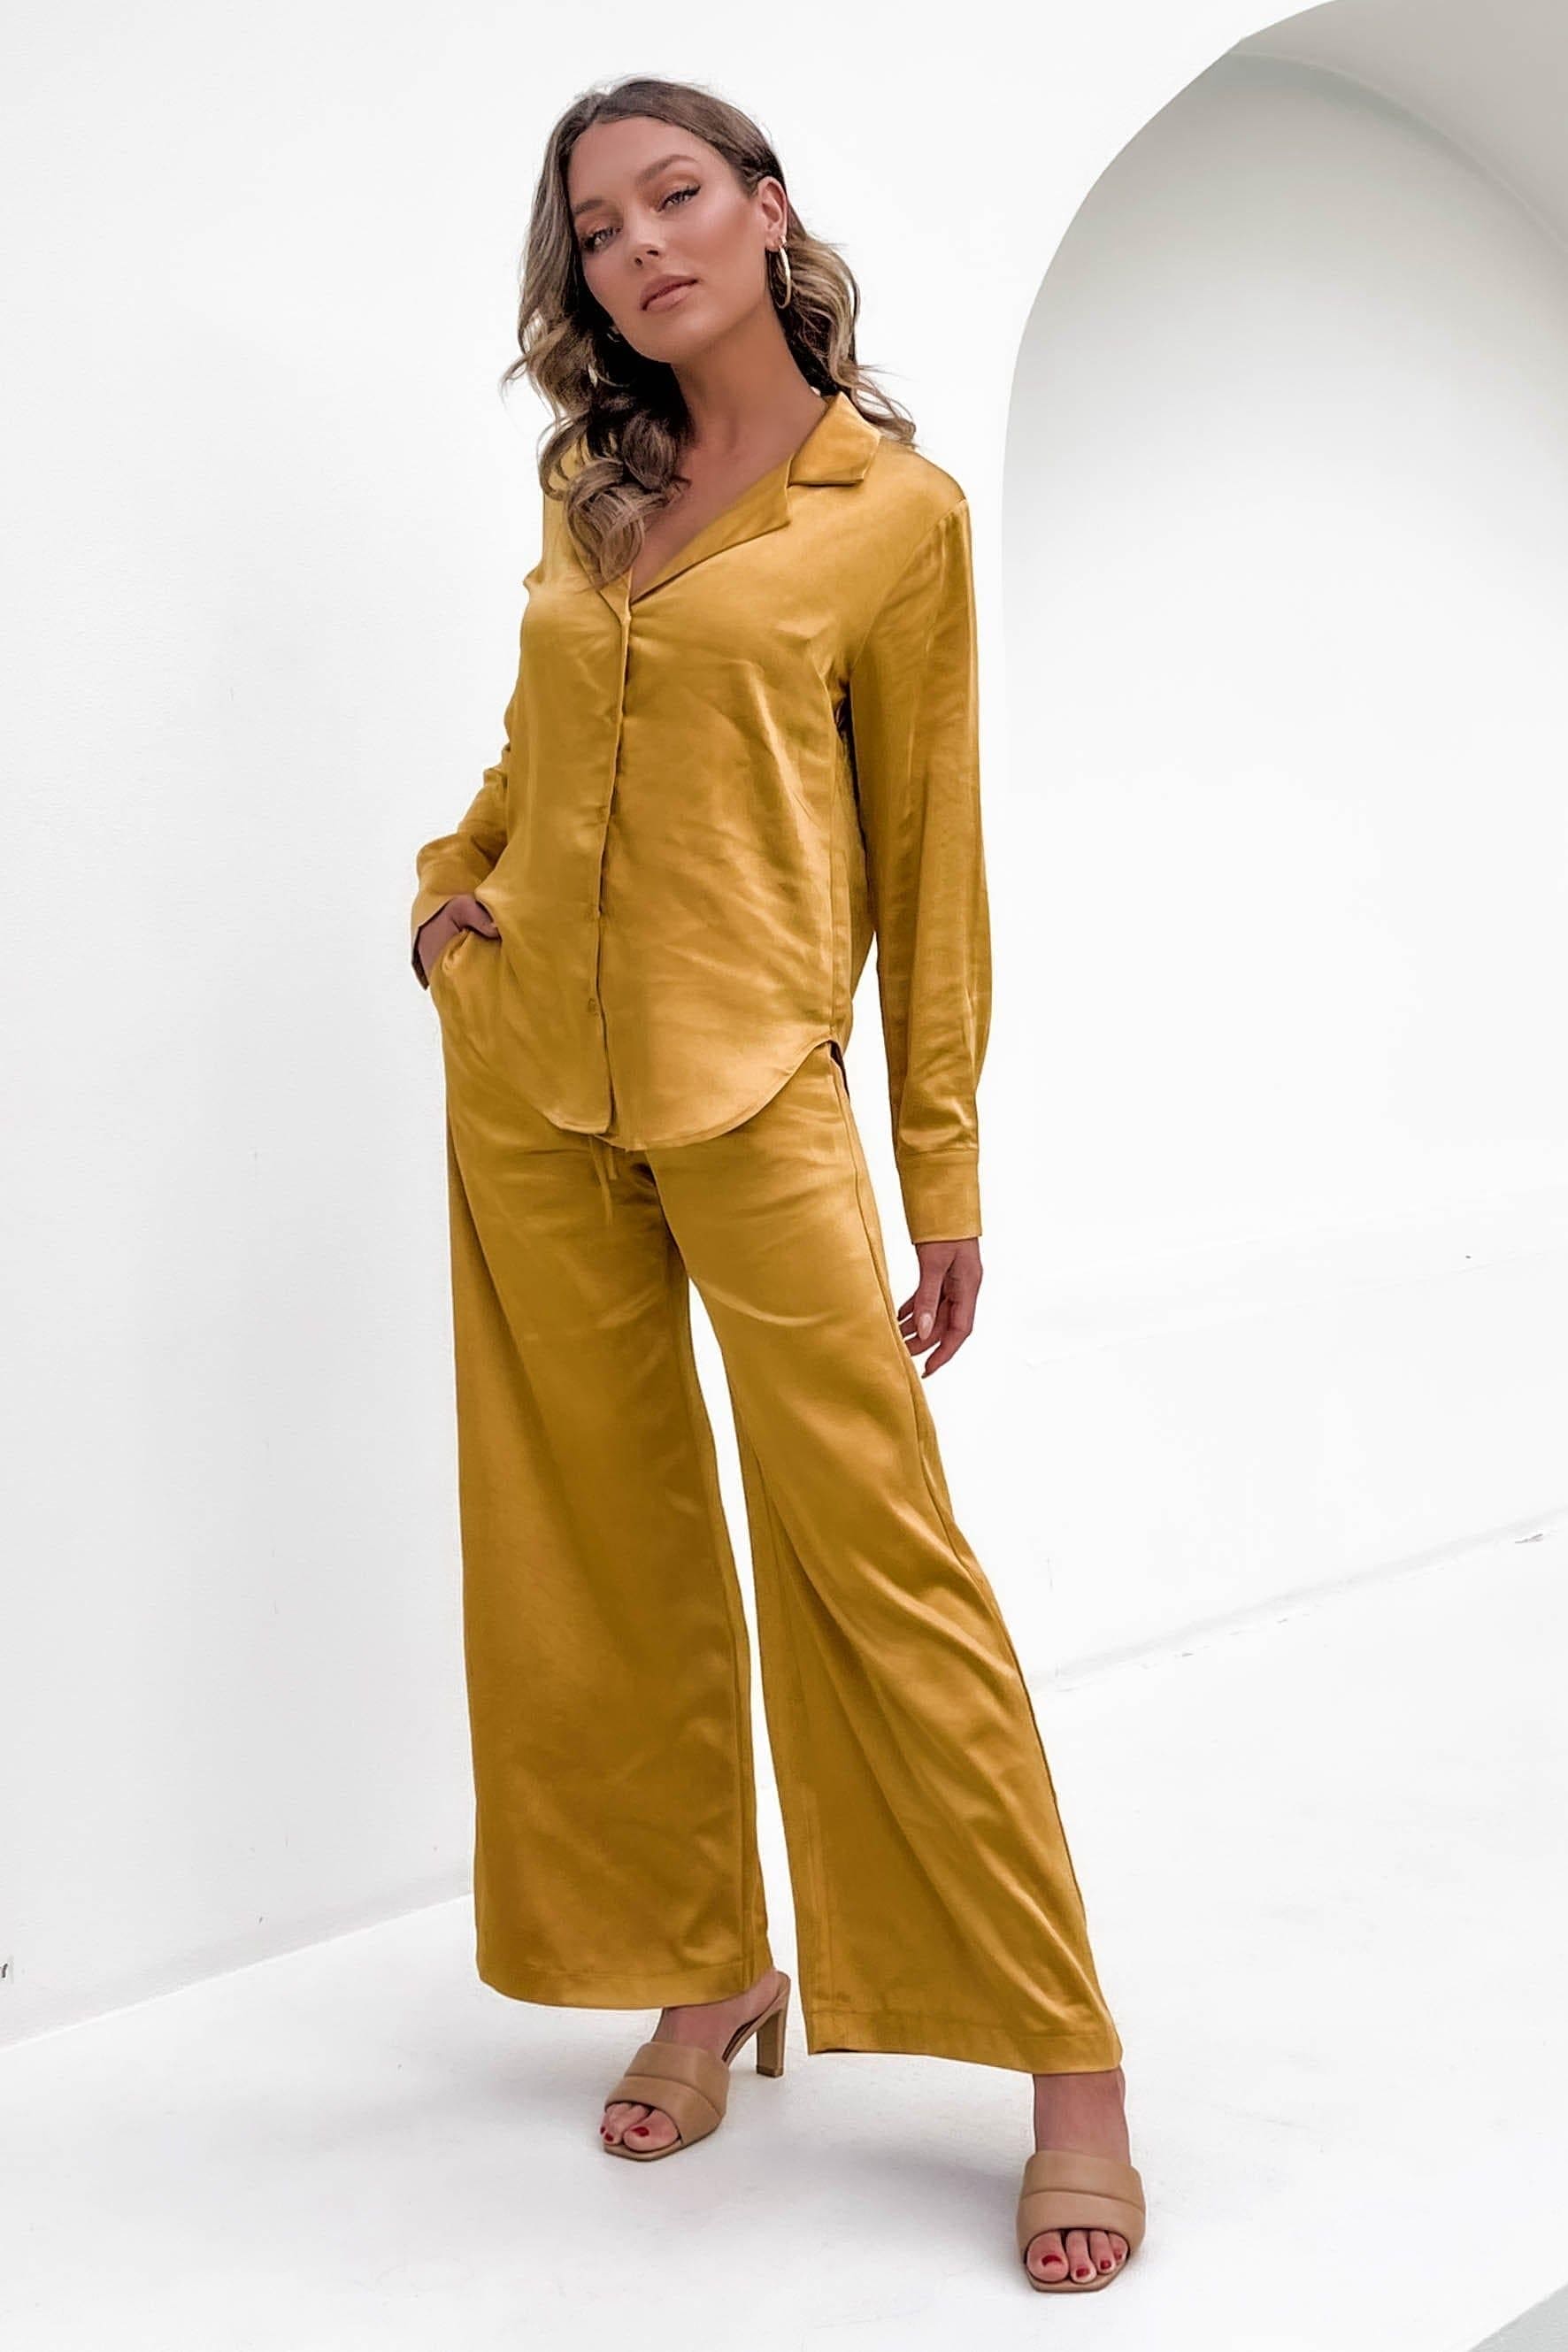 Astri Top, BLOUSE, LONG SLEEVE, POLYESTER, TOP, TOPS, YELLOW, Our New Astri Top Is Now Only $66.00 Exclusive At Mishkah, Our New Astri Top is now only $66.00-We Have The Latest Women's Tops @ Mishkah Online Fashion Boutique-MISHKAH